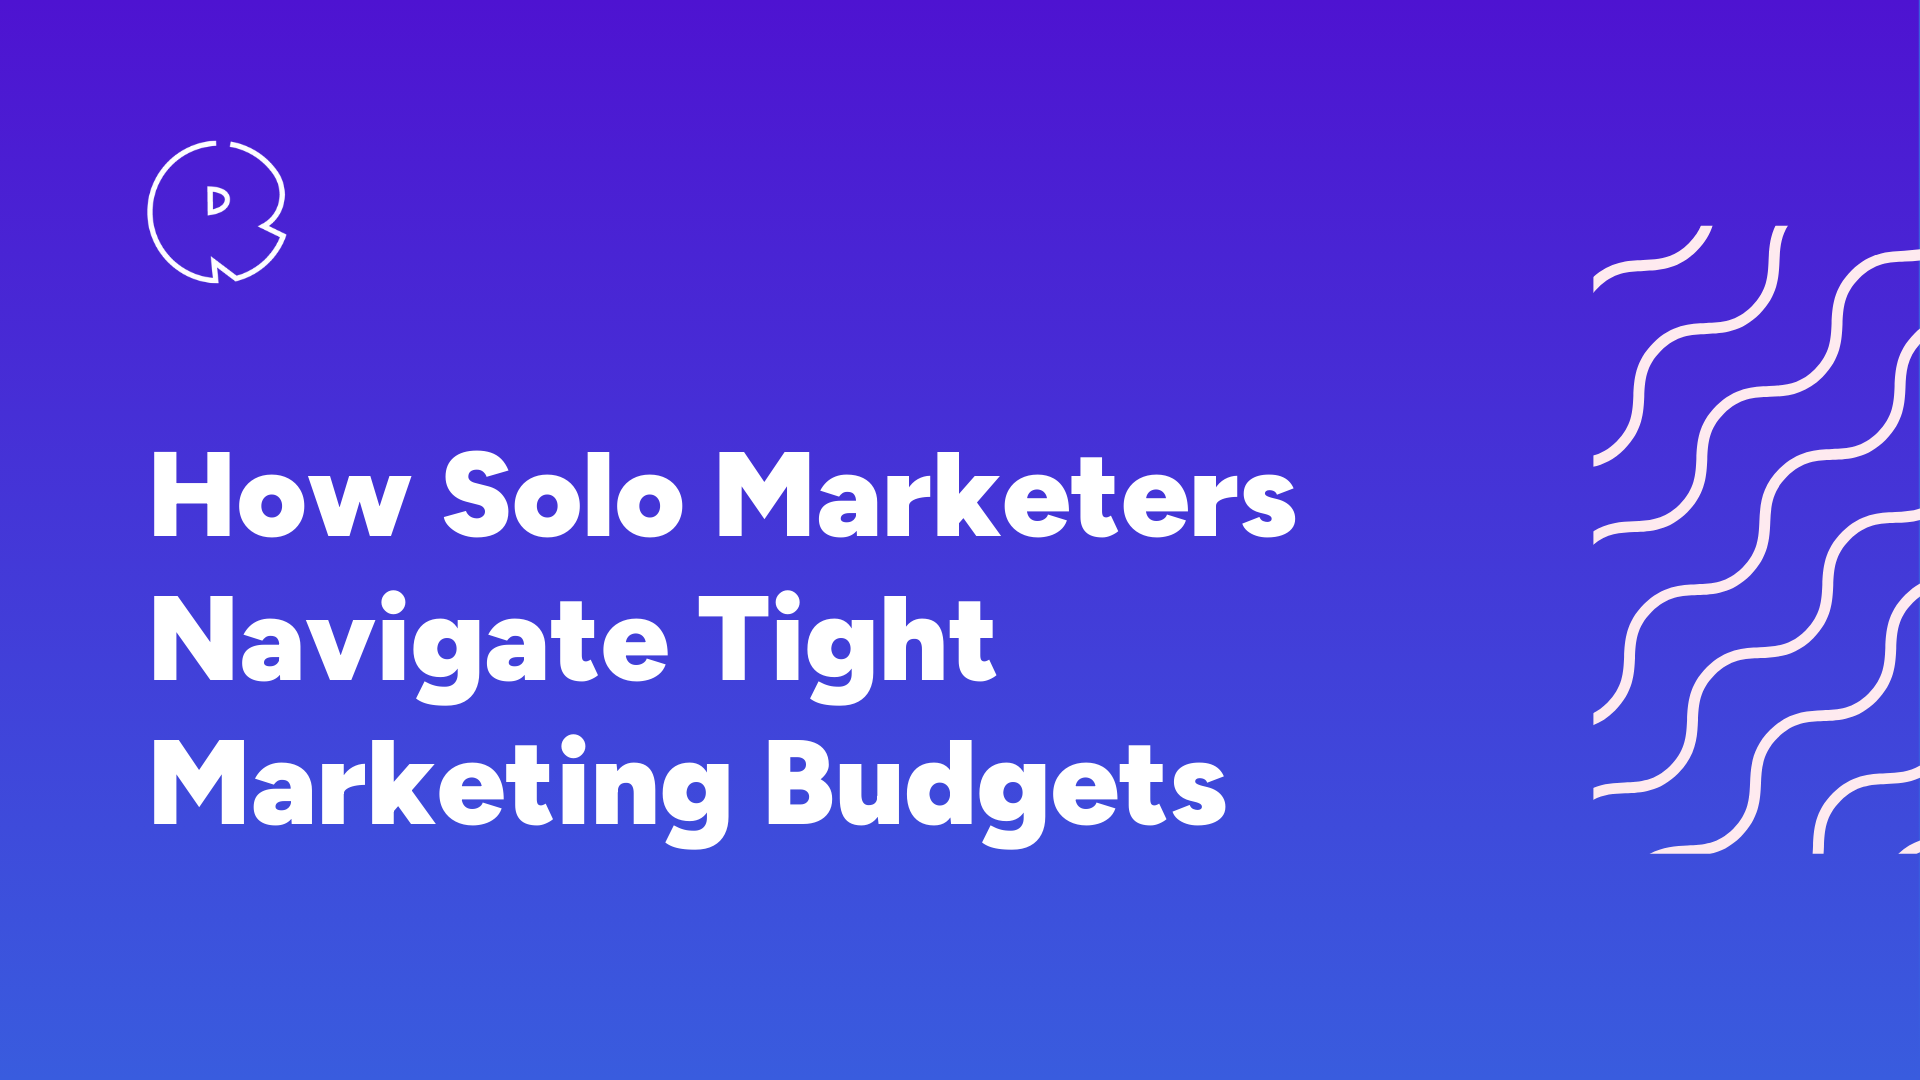 How Solo Marketers Navigate Tight Marketing Budgets